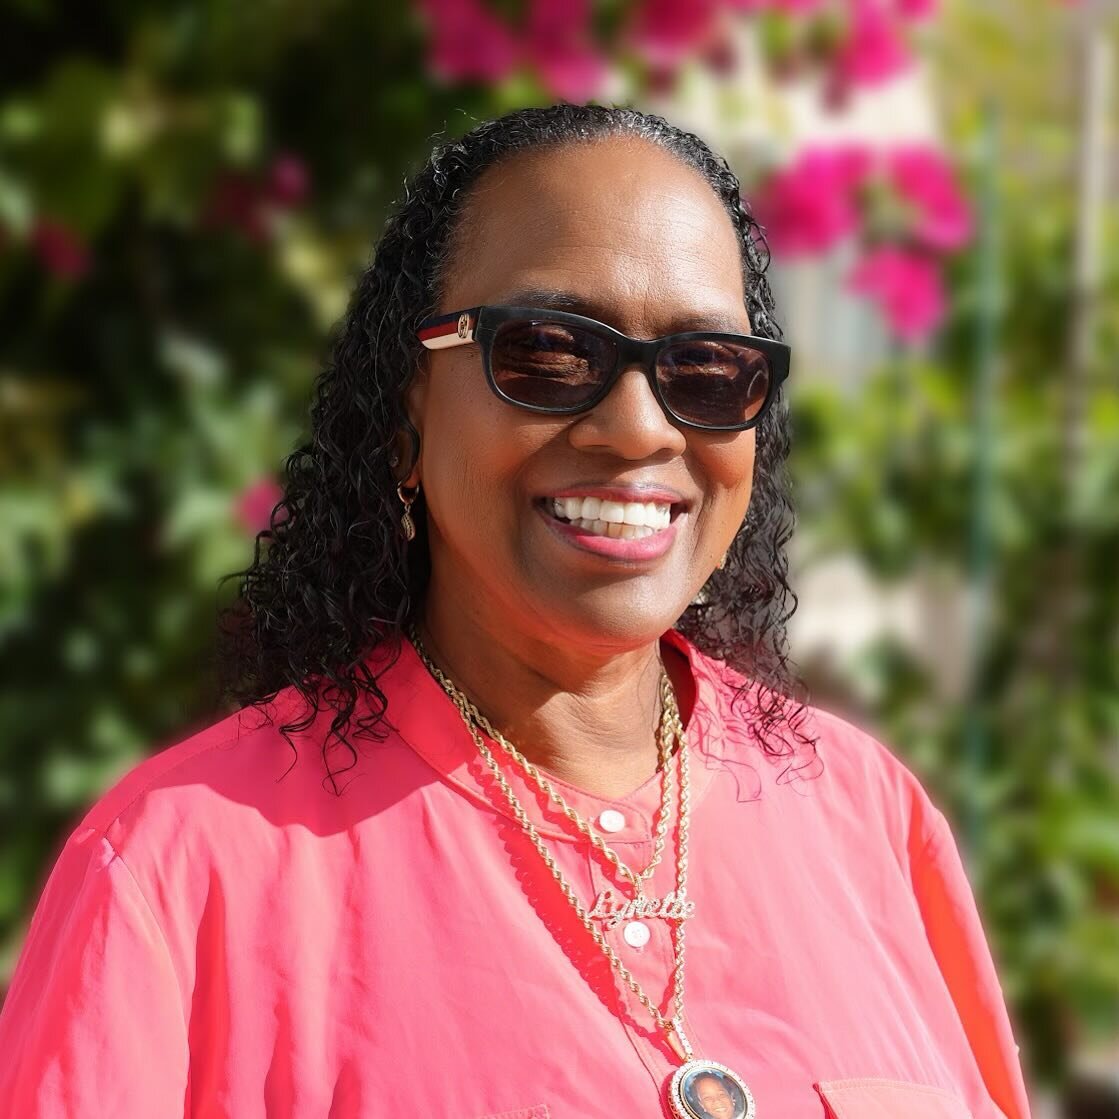 MEET OUR FOUNDER: Lynette Mackey 

Born in San Francisco in 1959, Lynette has been a beacon of love, compassion, and community devotion throughout her life. A beloved figure in the Fillmore community, she has dedicated her life to be of service to ot